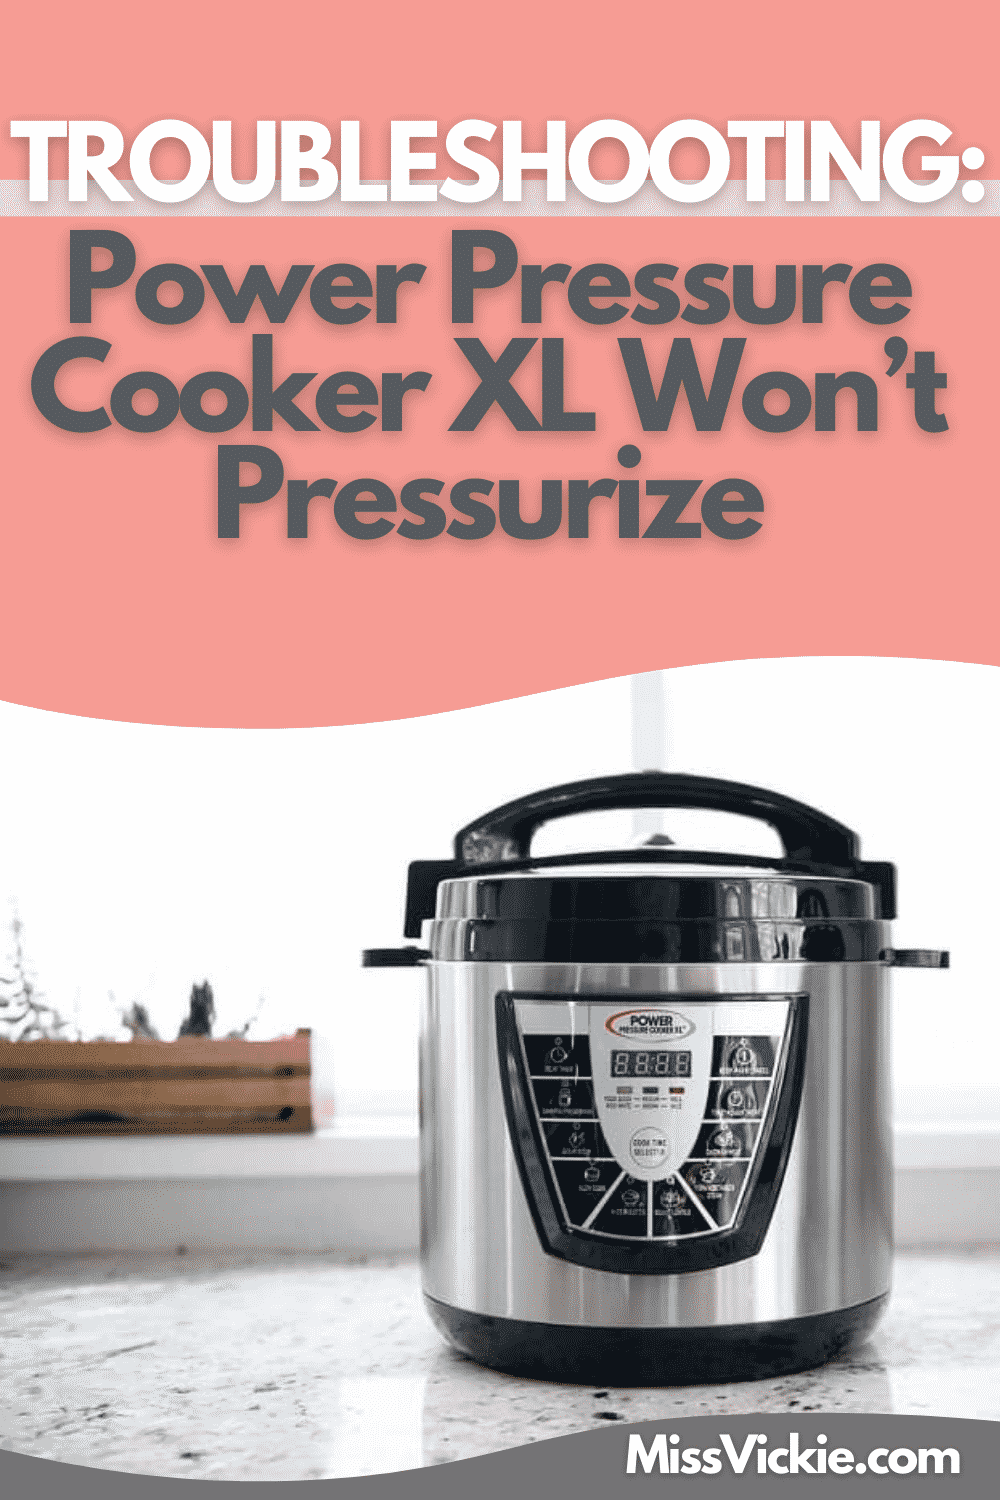 Troubleshooting Power Pressure Cooker XL Wont Pressurize